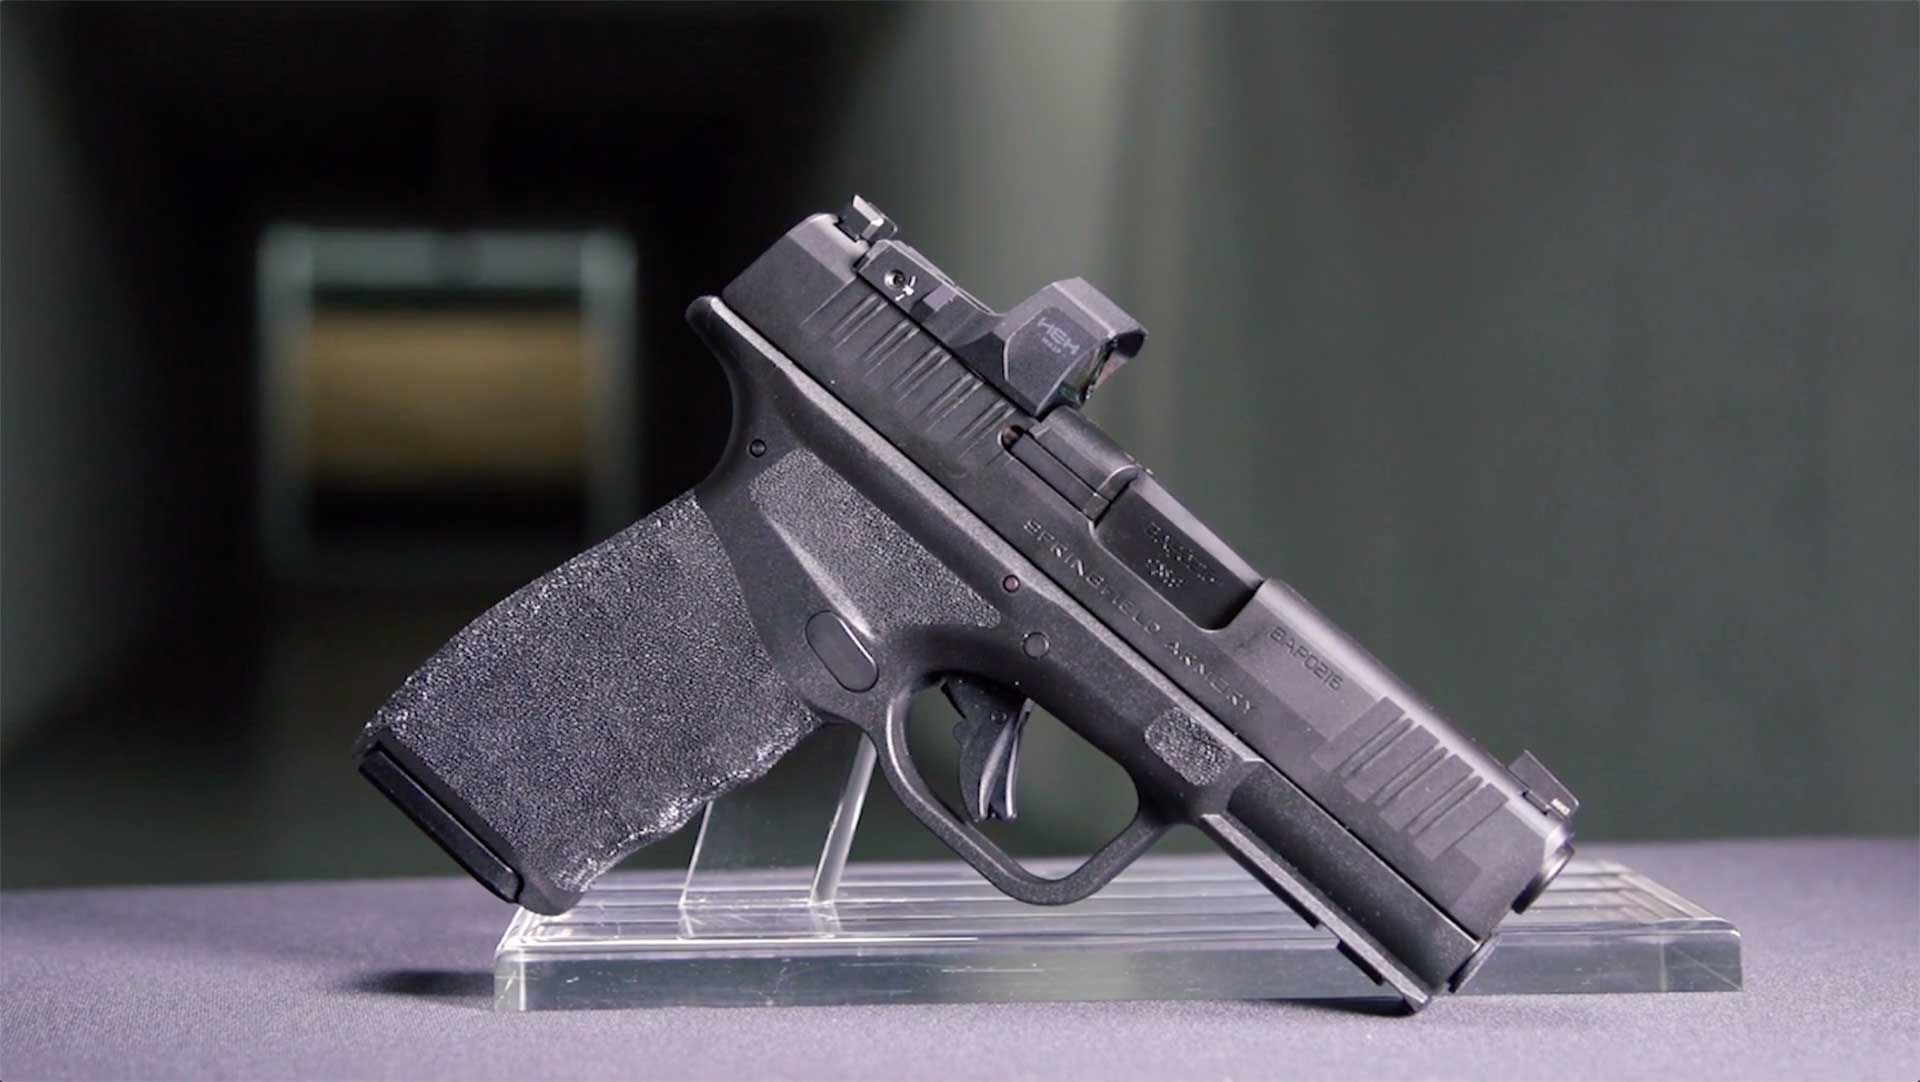 Right side of the Springfield Armory Hellcat Pro pistol.